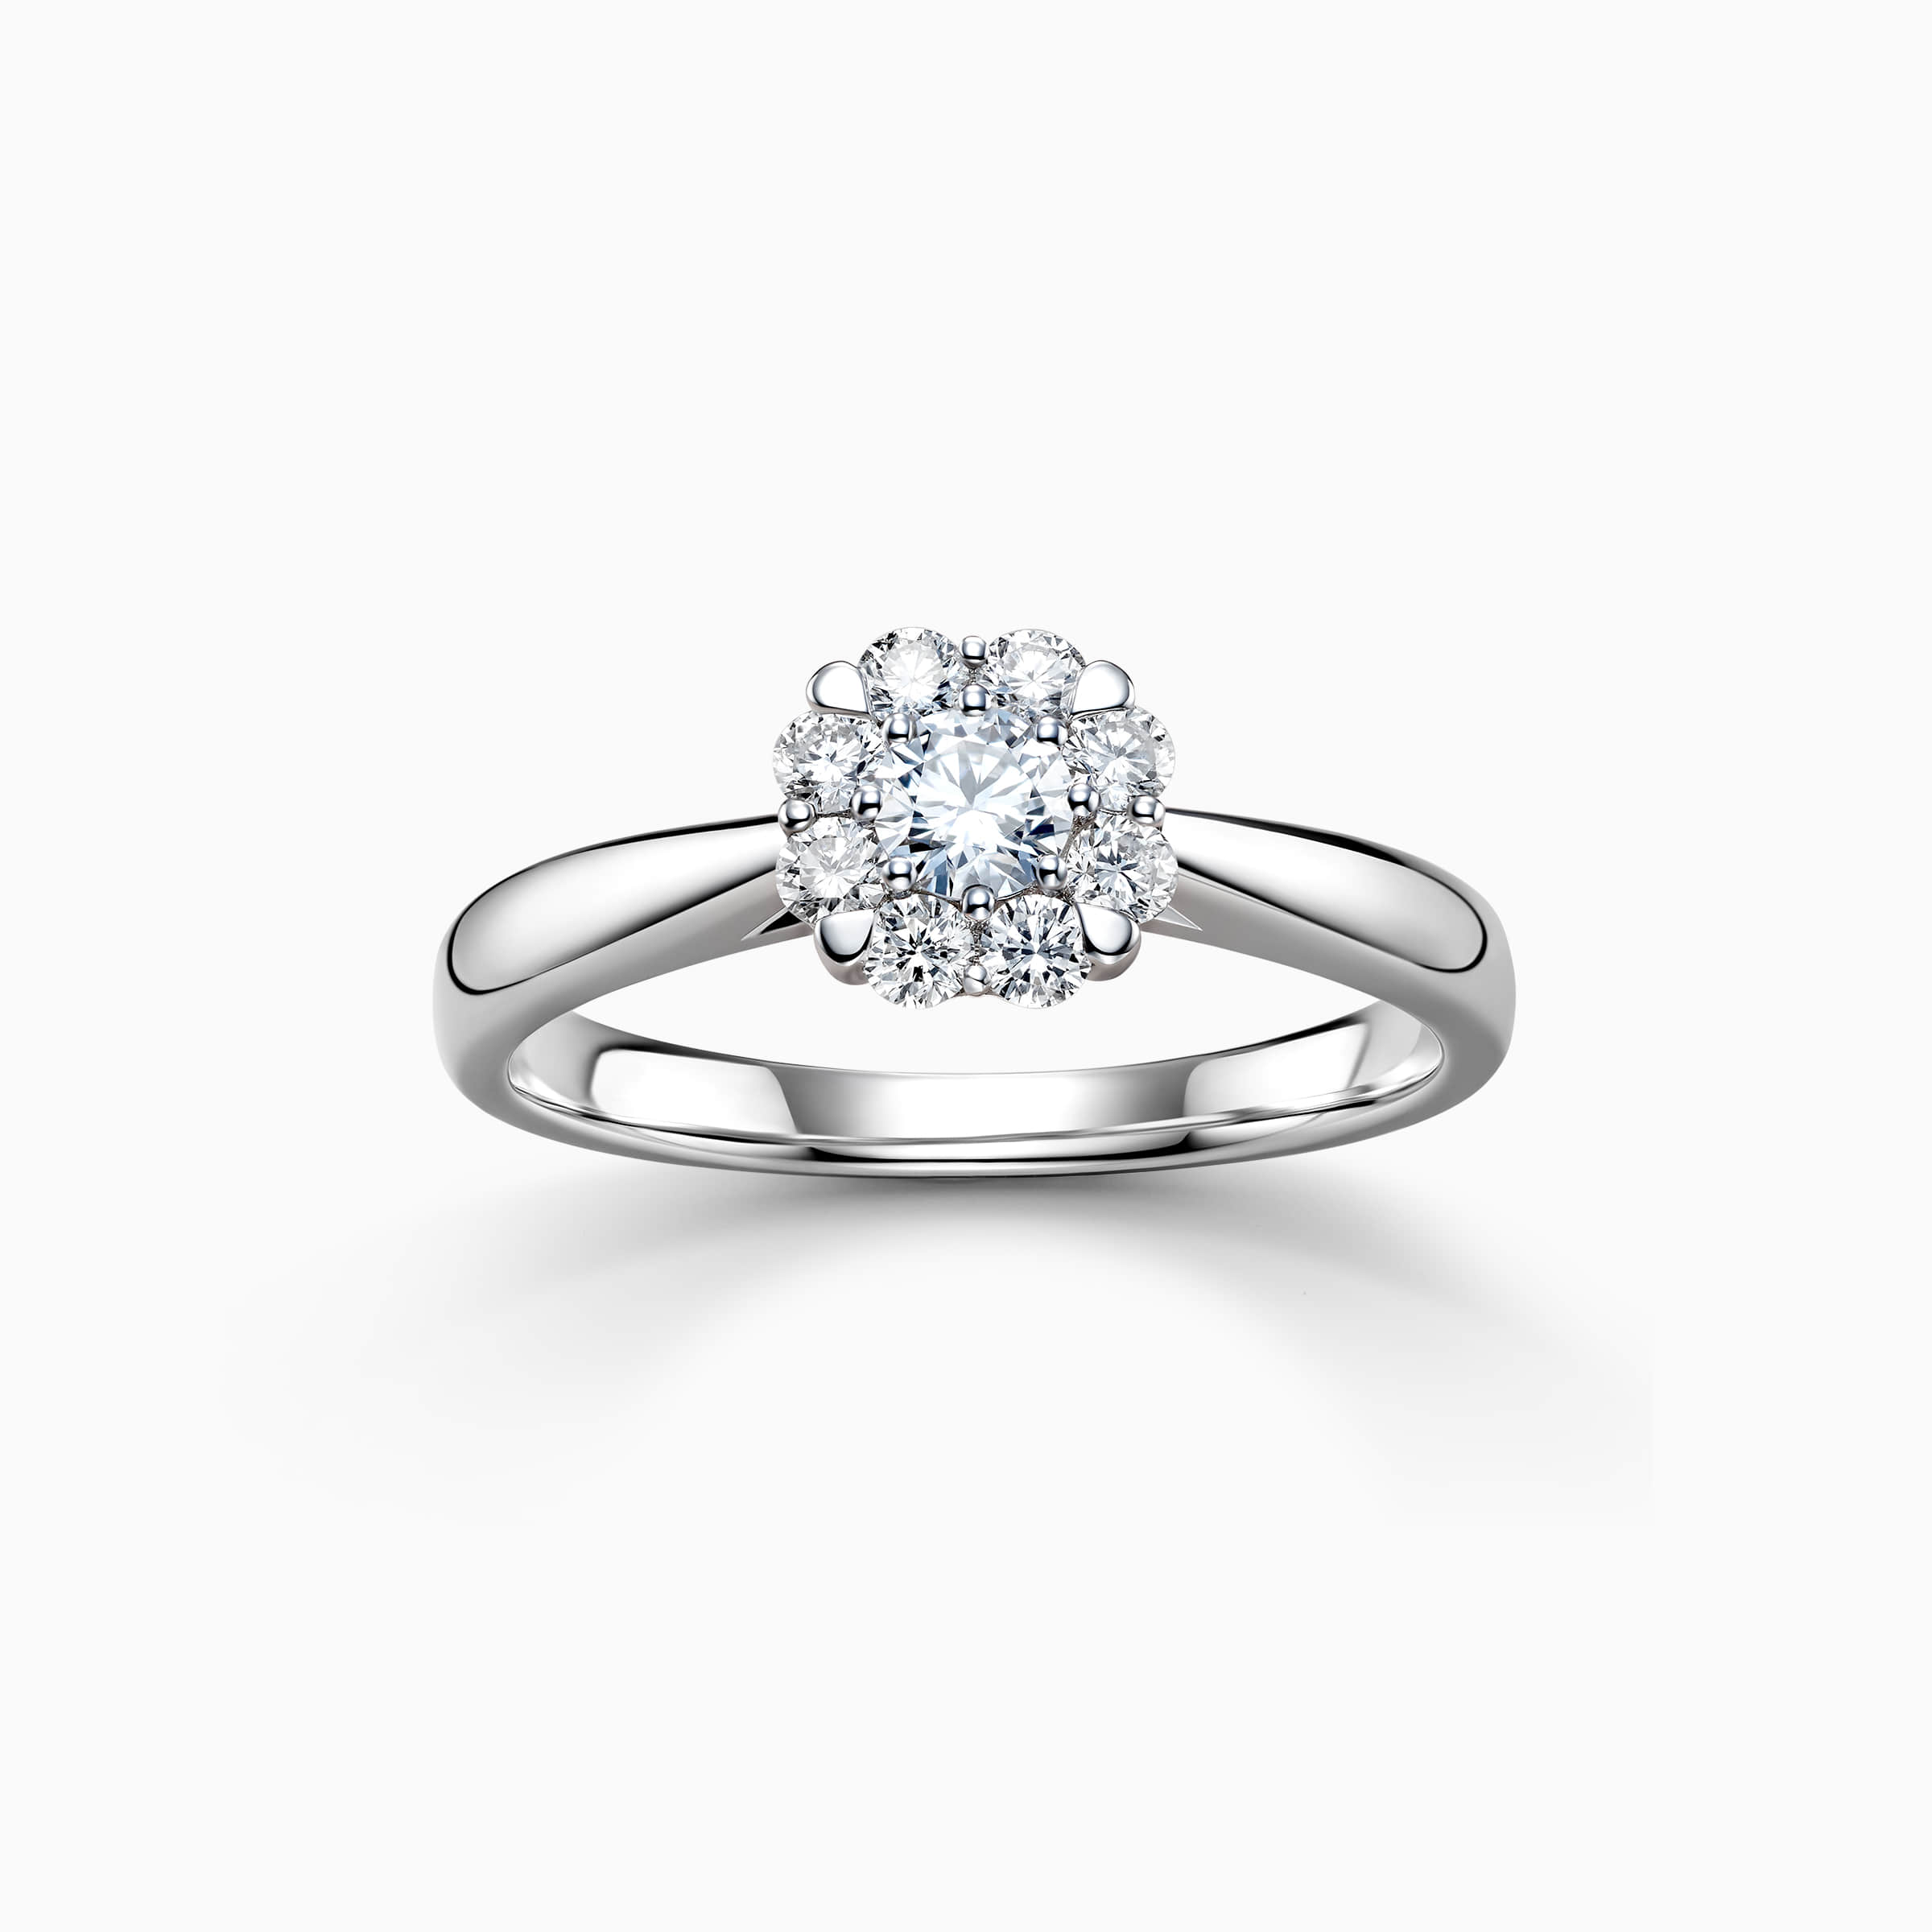 Darry Ring diamond halo promise ring white gold